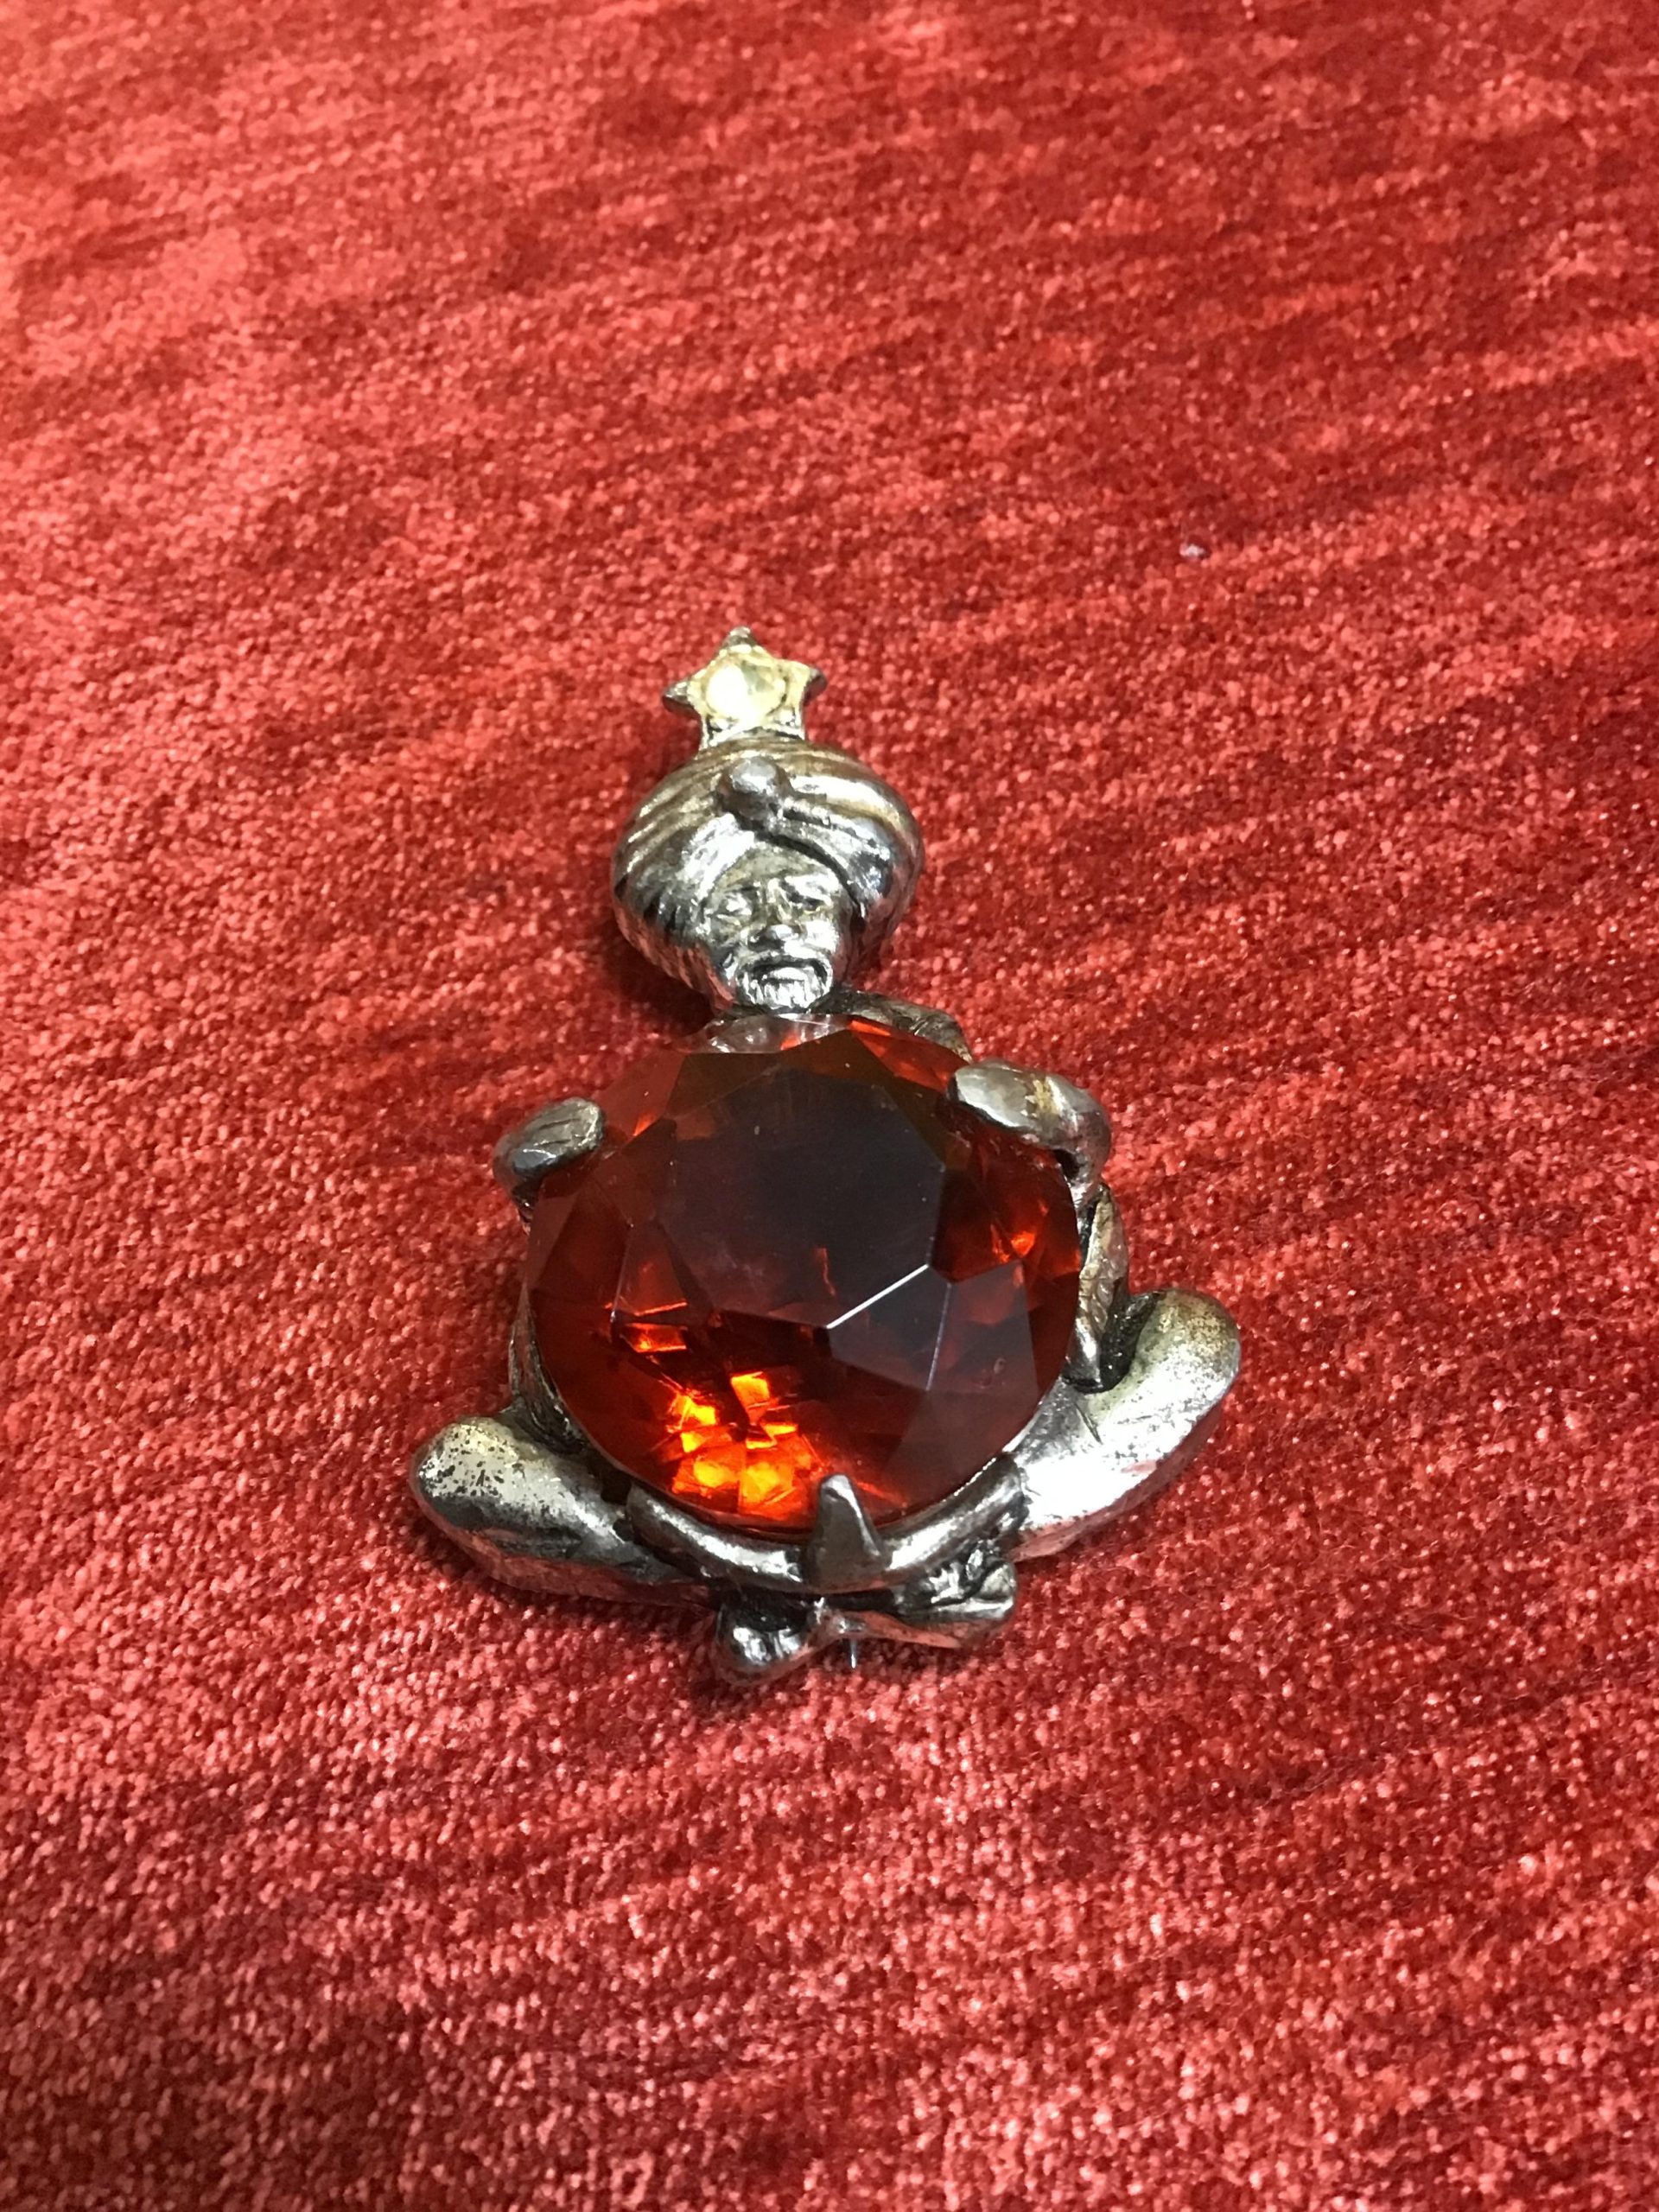 UNIQUE! Vint. Silver Brooch w Lrg. Amber Stone